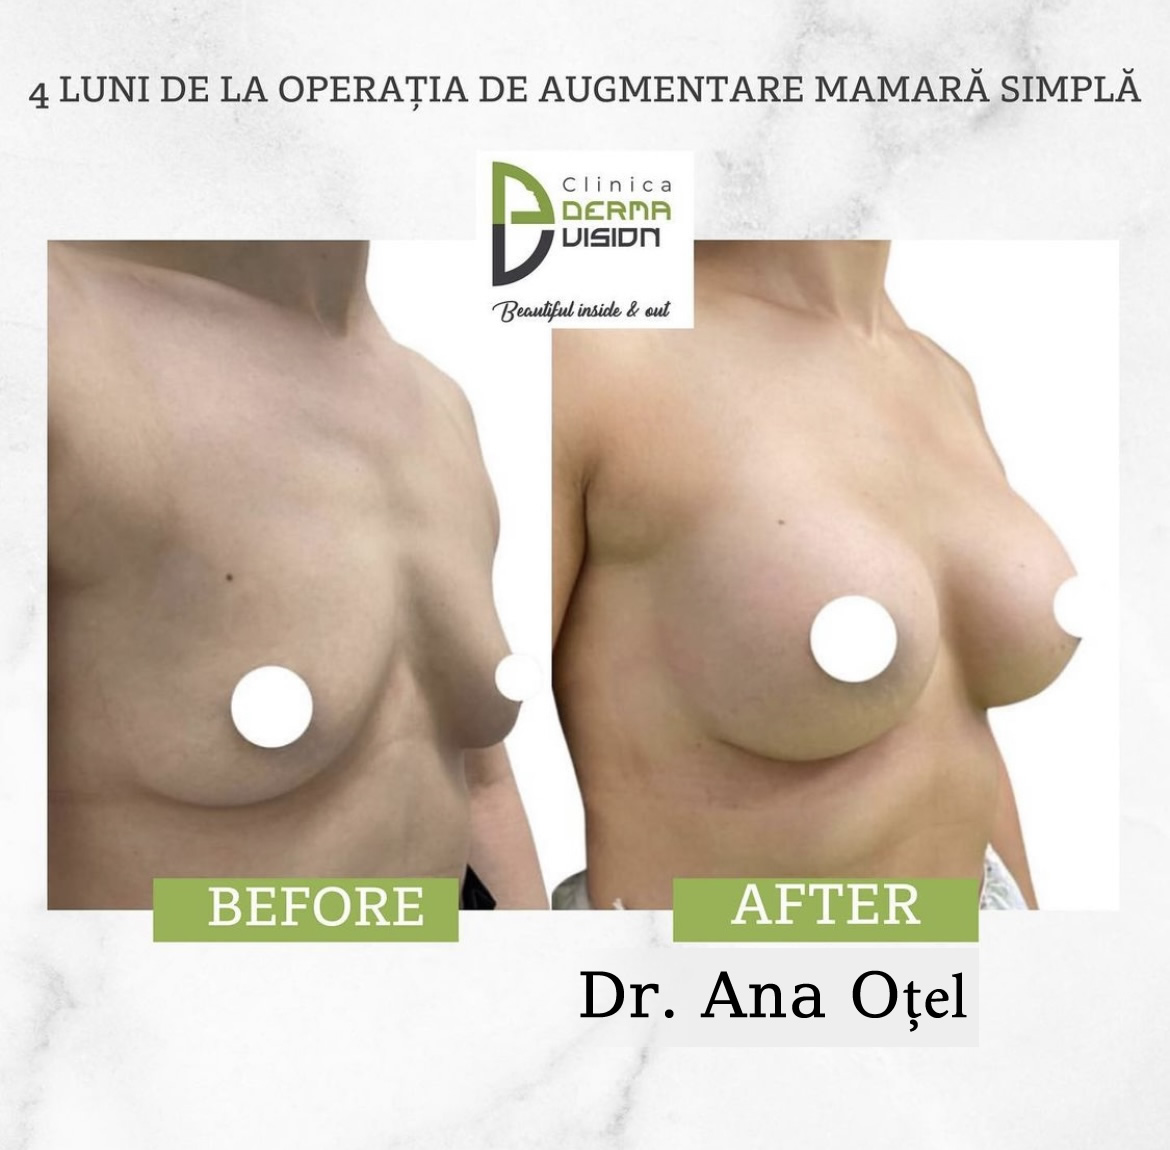 before-after1 augmentare